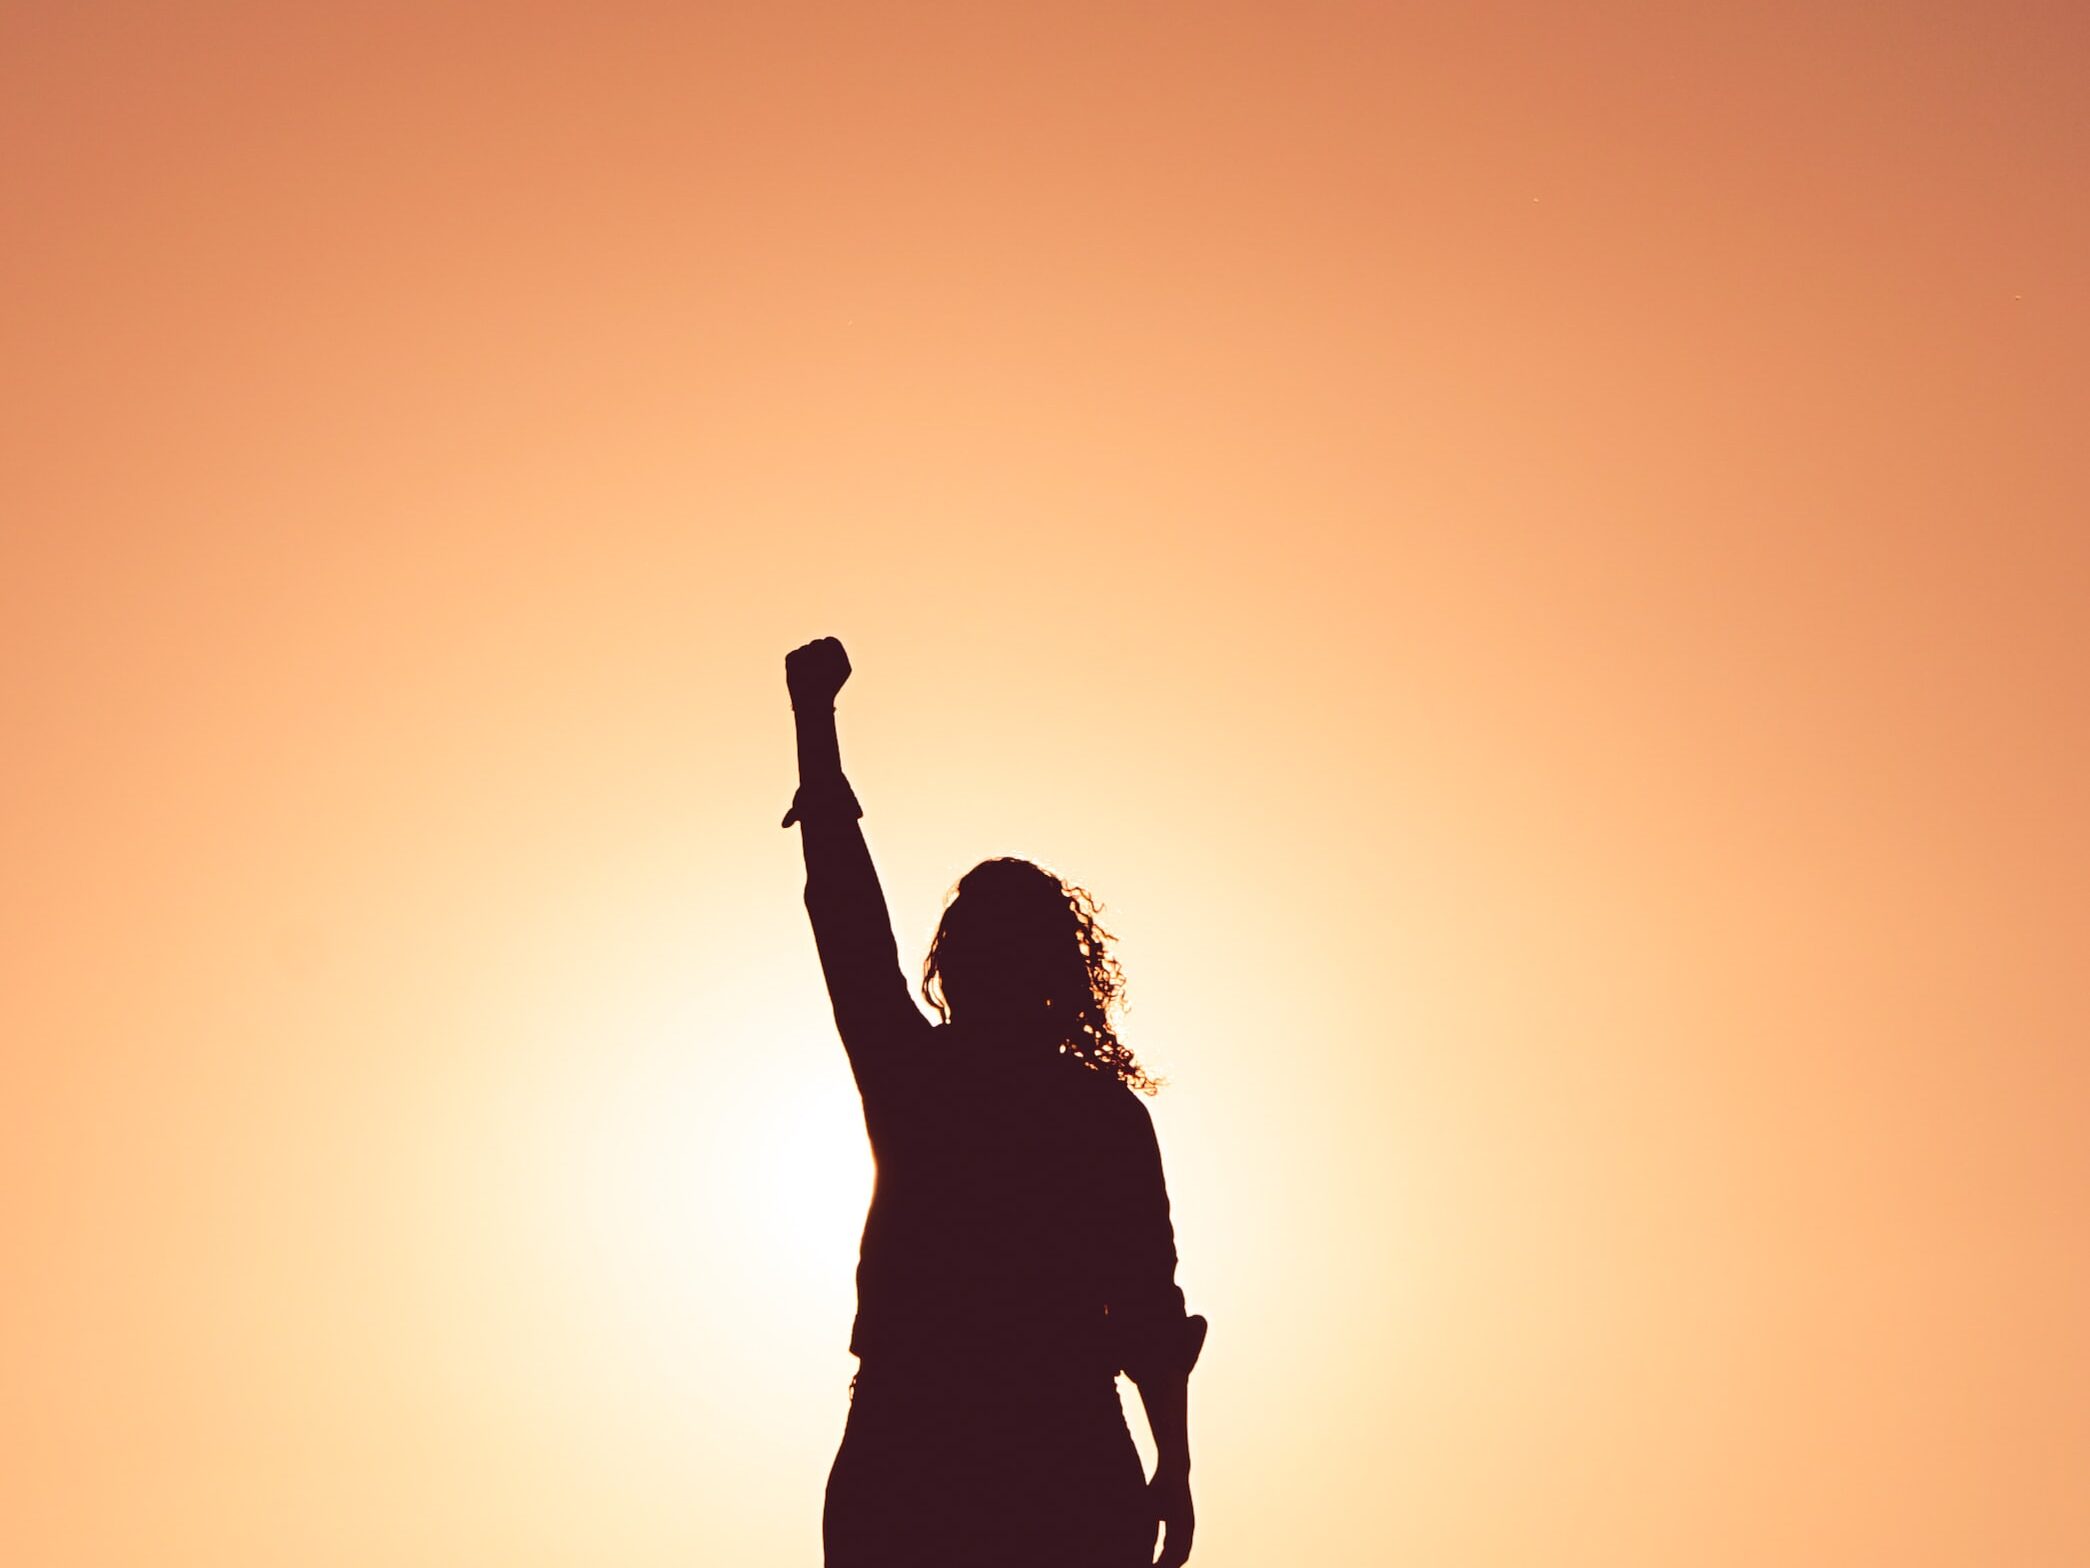 A person stands against the sun with their fist in the air